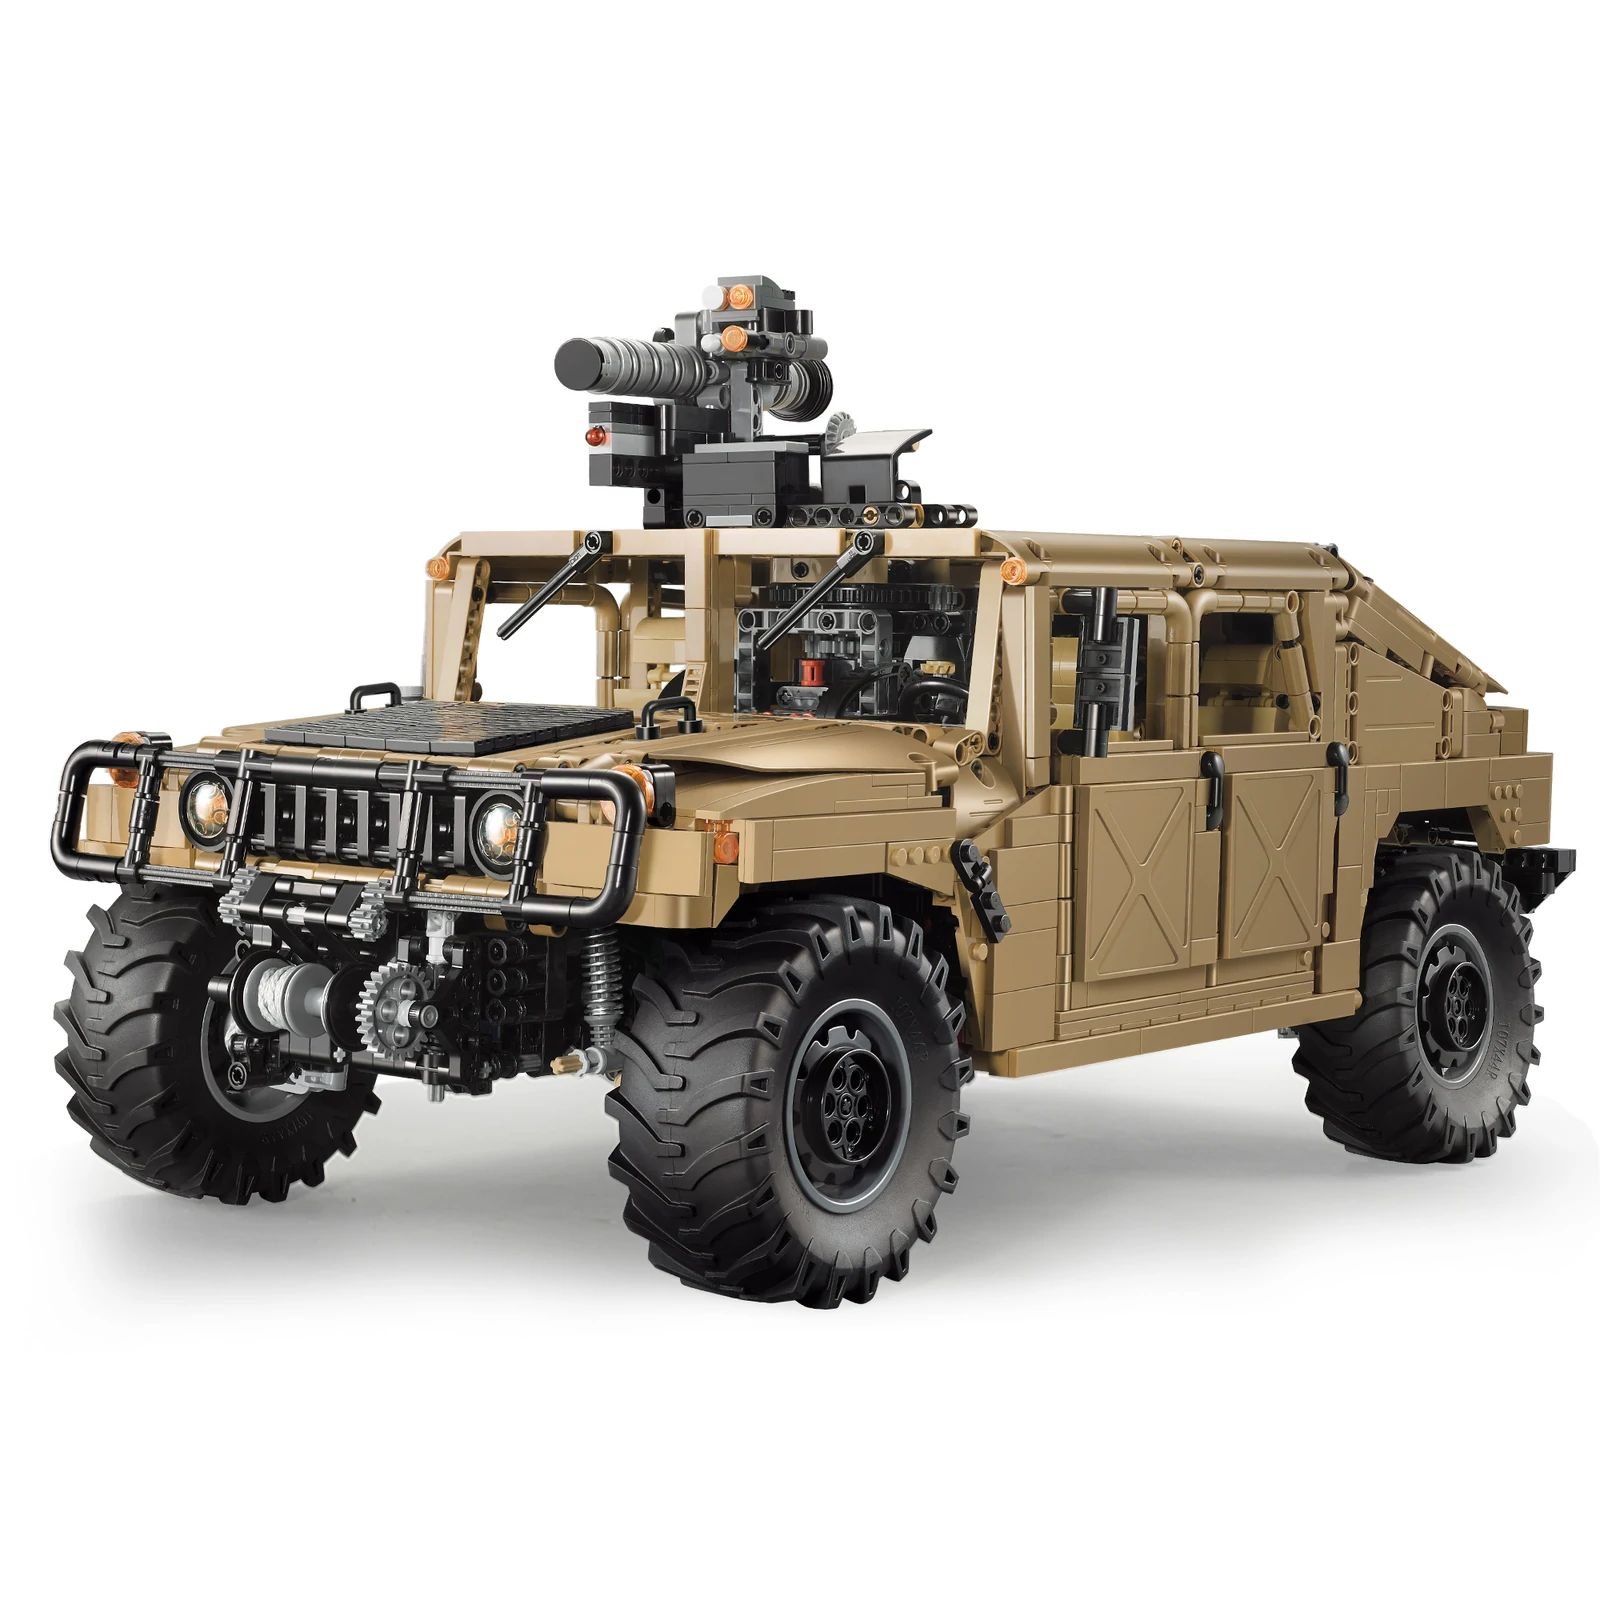 CaDA 1:8 Scale Humvee Off-Road Vehicle Remote Controlled Brick Building Set